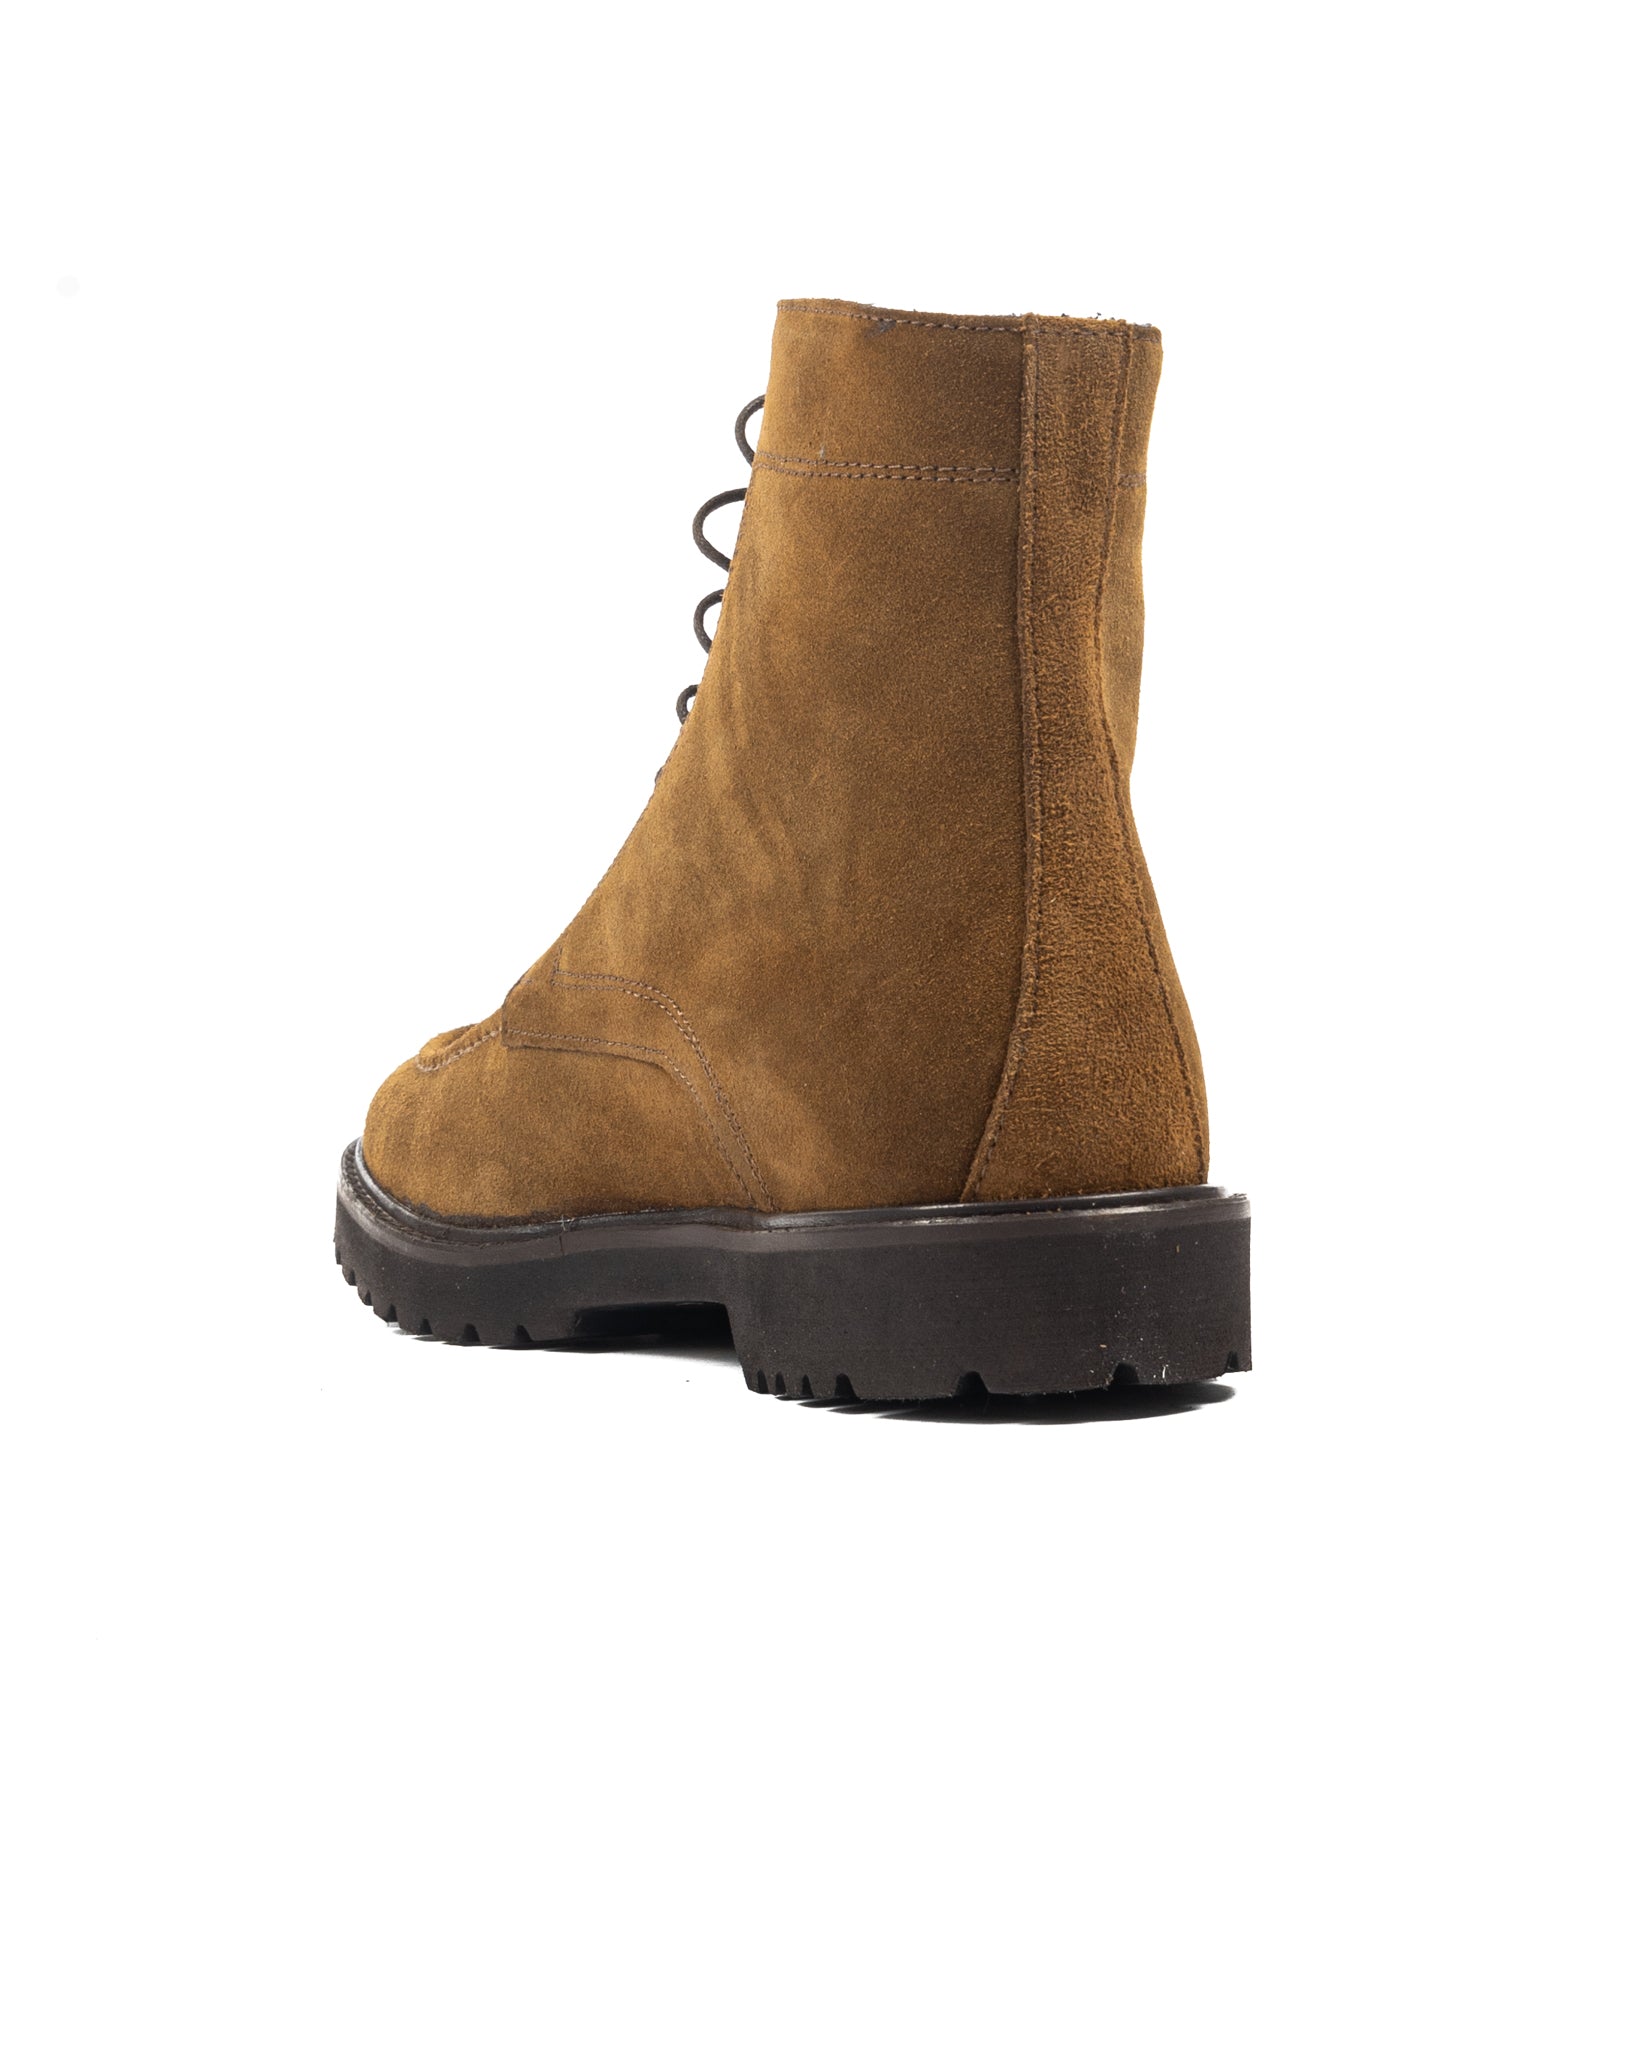 Astron - tobacco suede boot